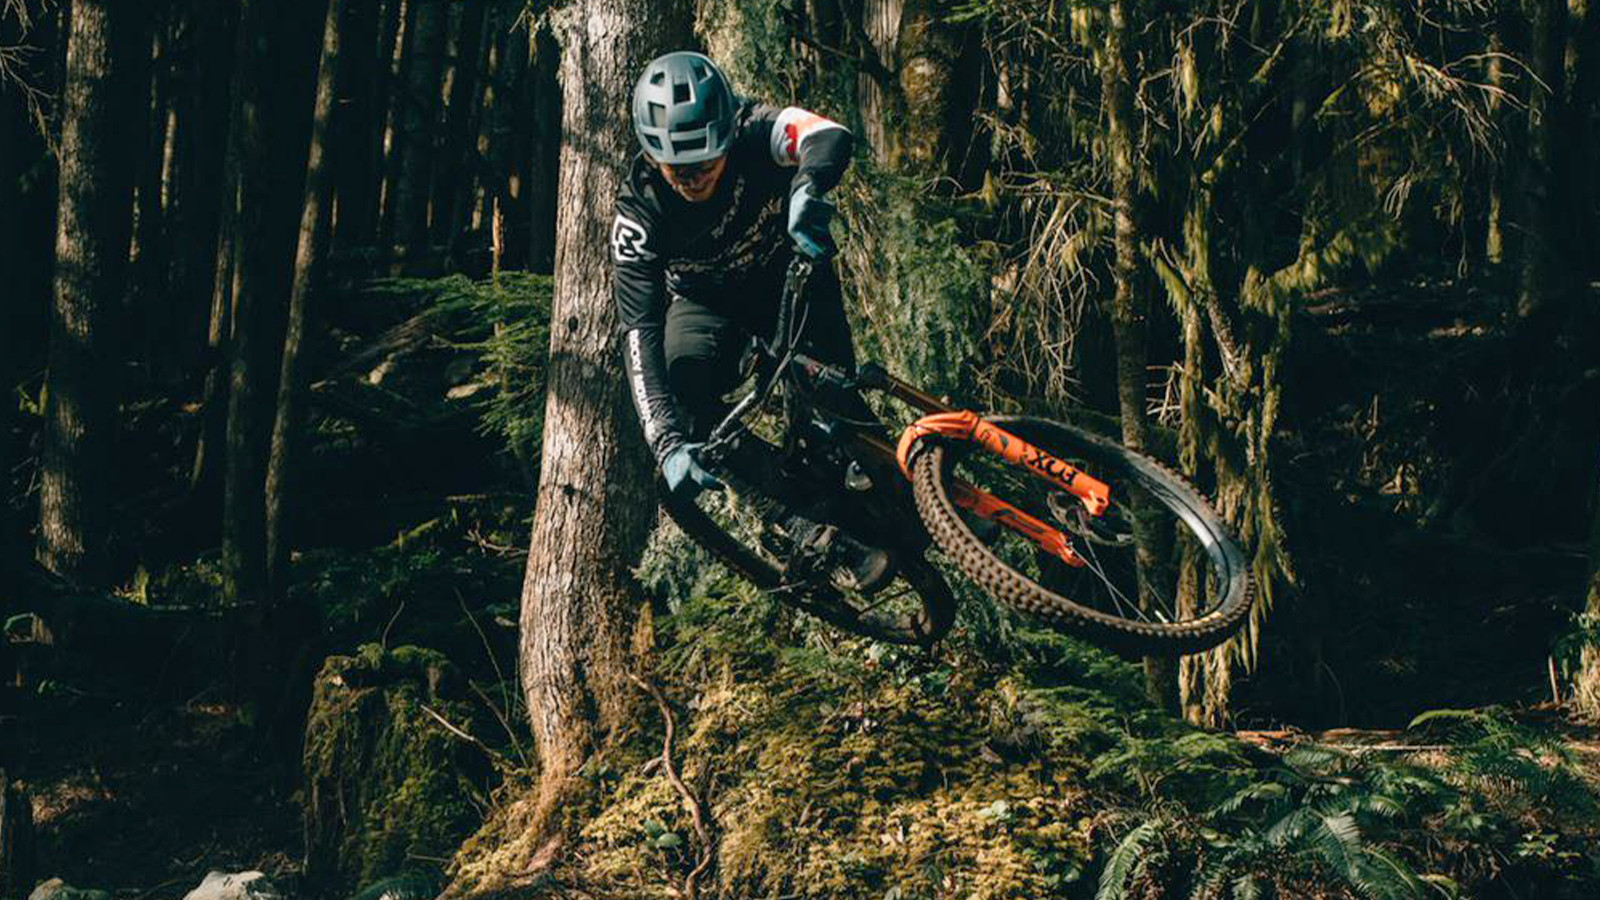 The Rocky Mountain Race Face Enduro Team is Ready to Rip Bikes Press Releases